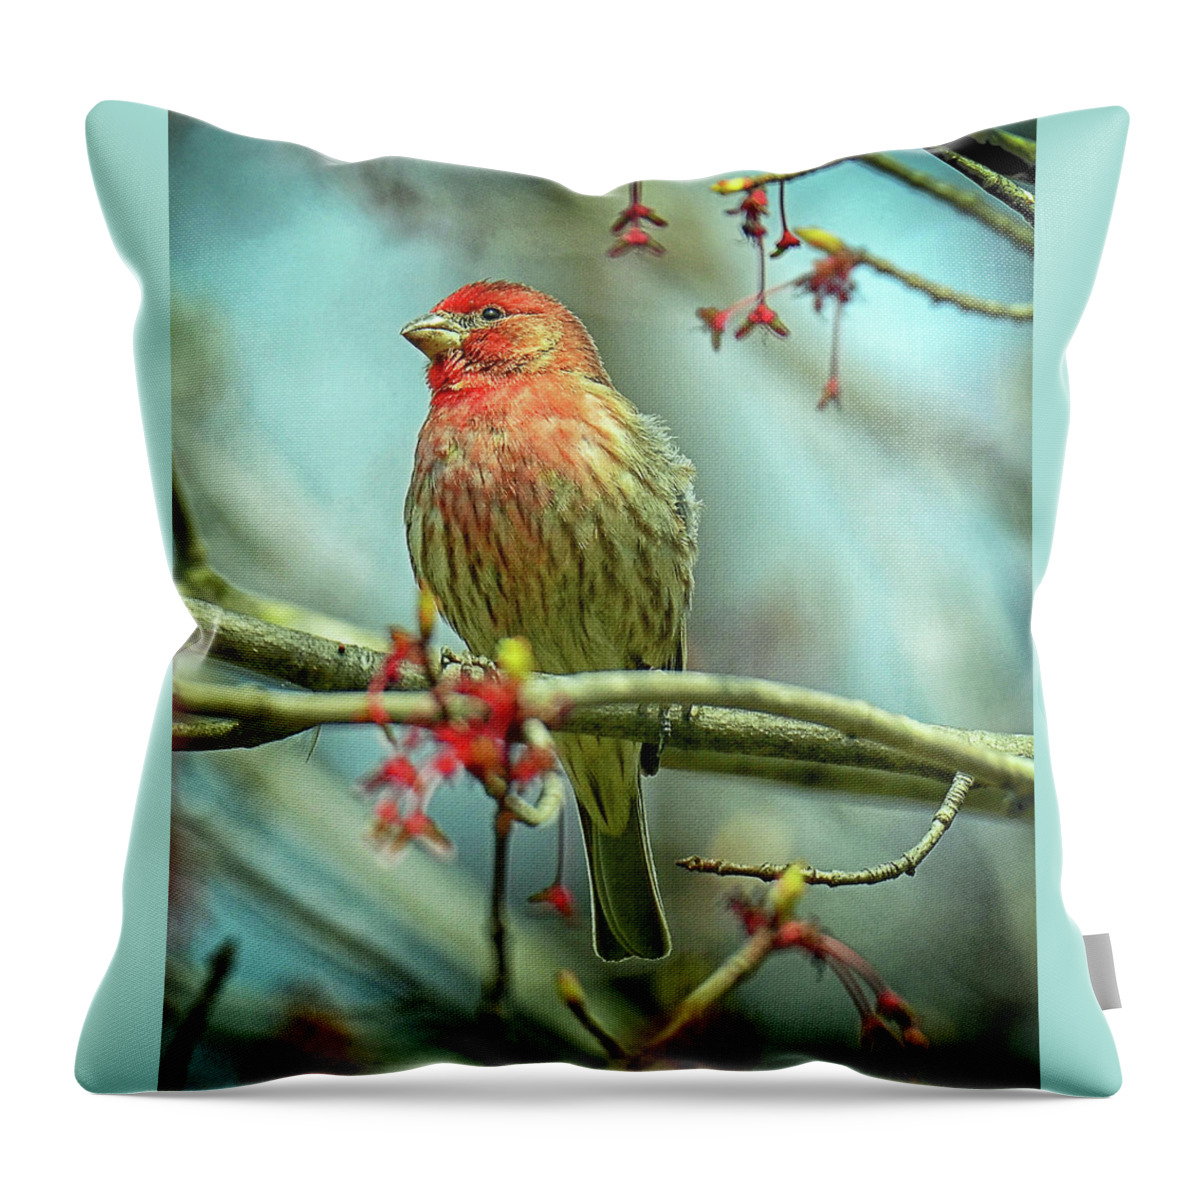 House Finch Throw Pillow featuring the photograph House Finch in Spring by Rodney Campbell